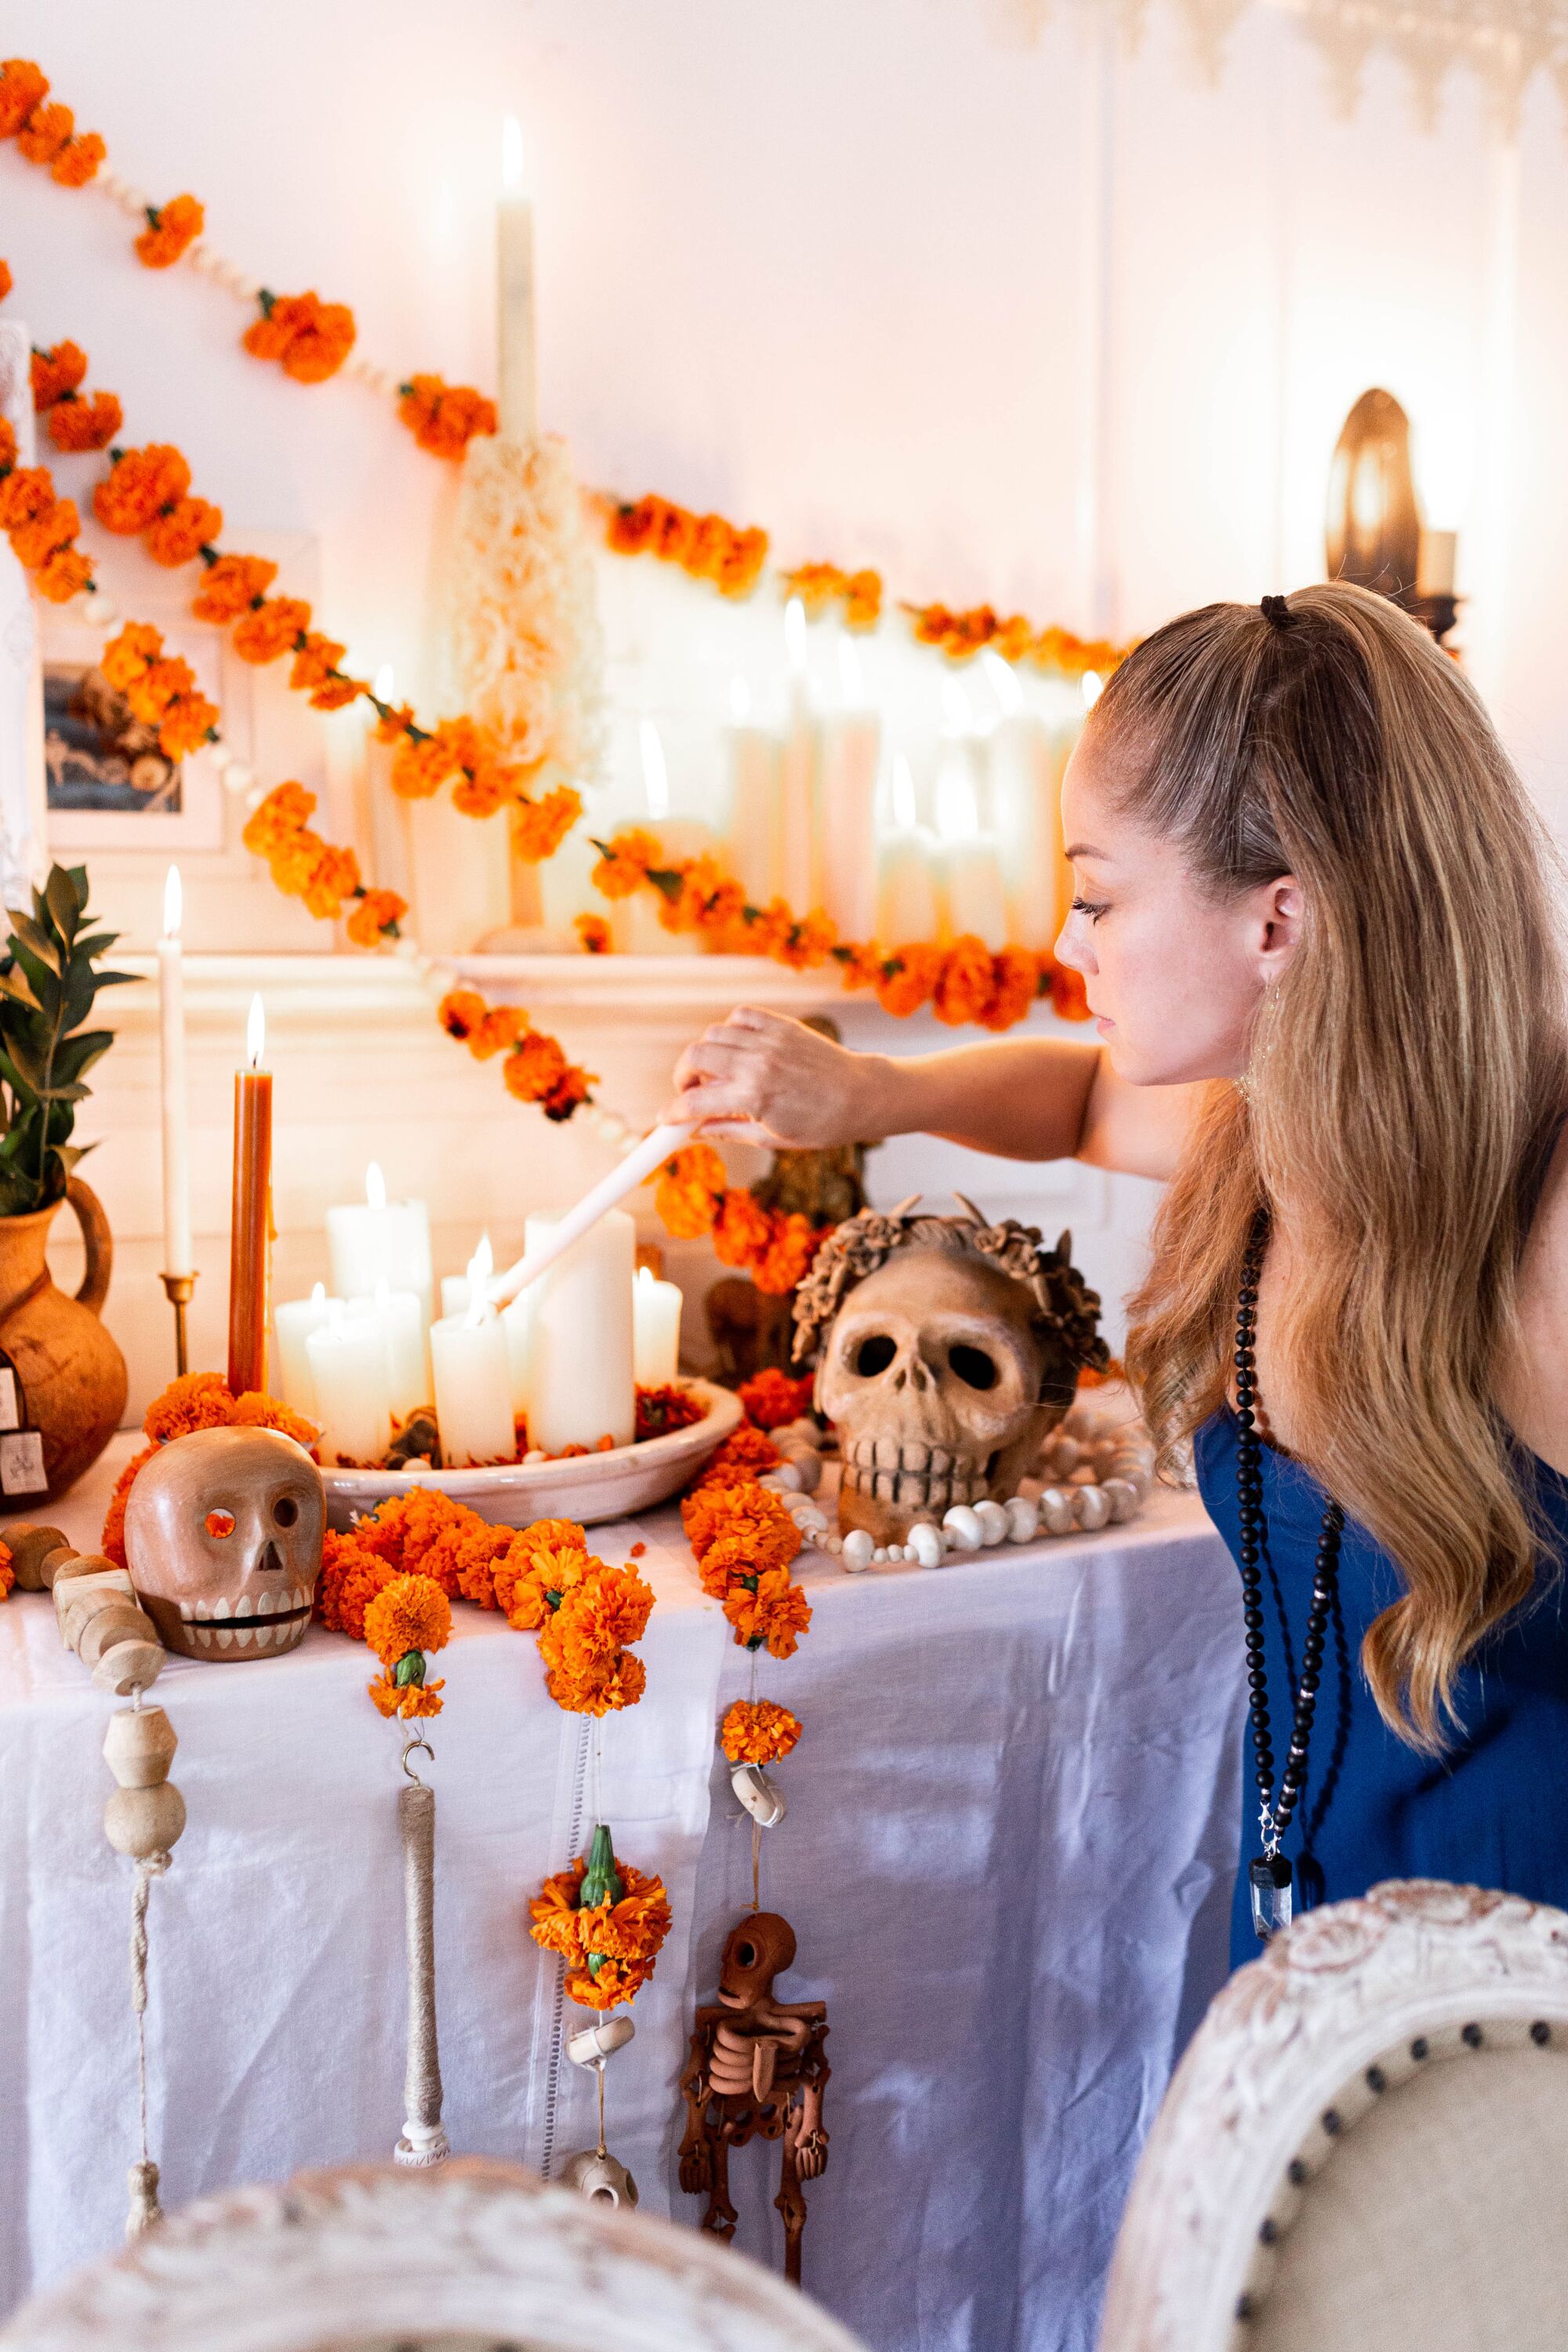 Chula Vista chef Marcela Valladolid has built a Dia de los Muertos altar in honor of her mother for seven years.